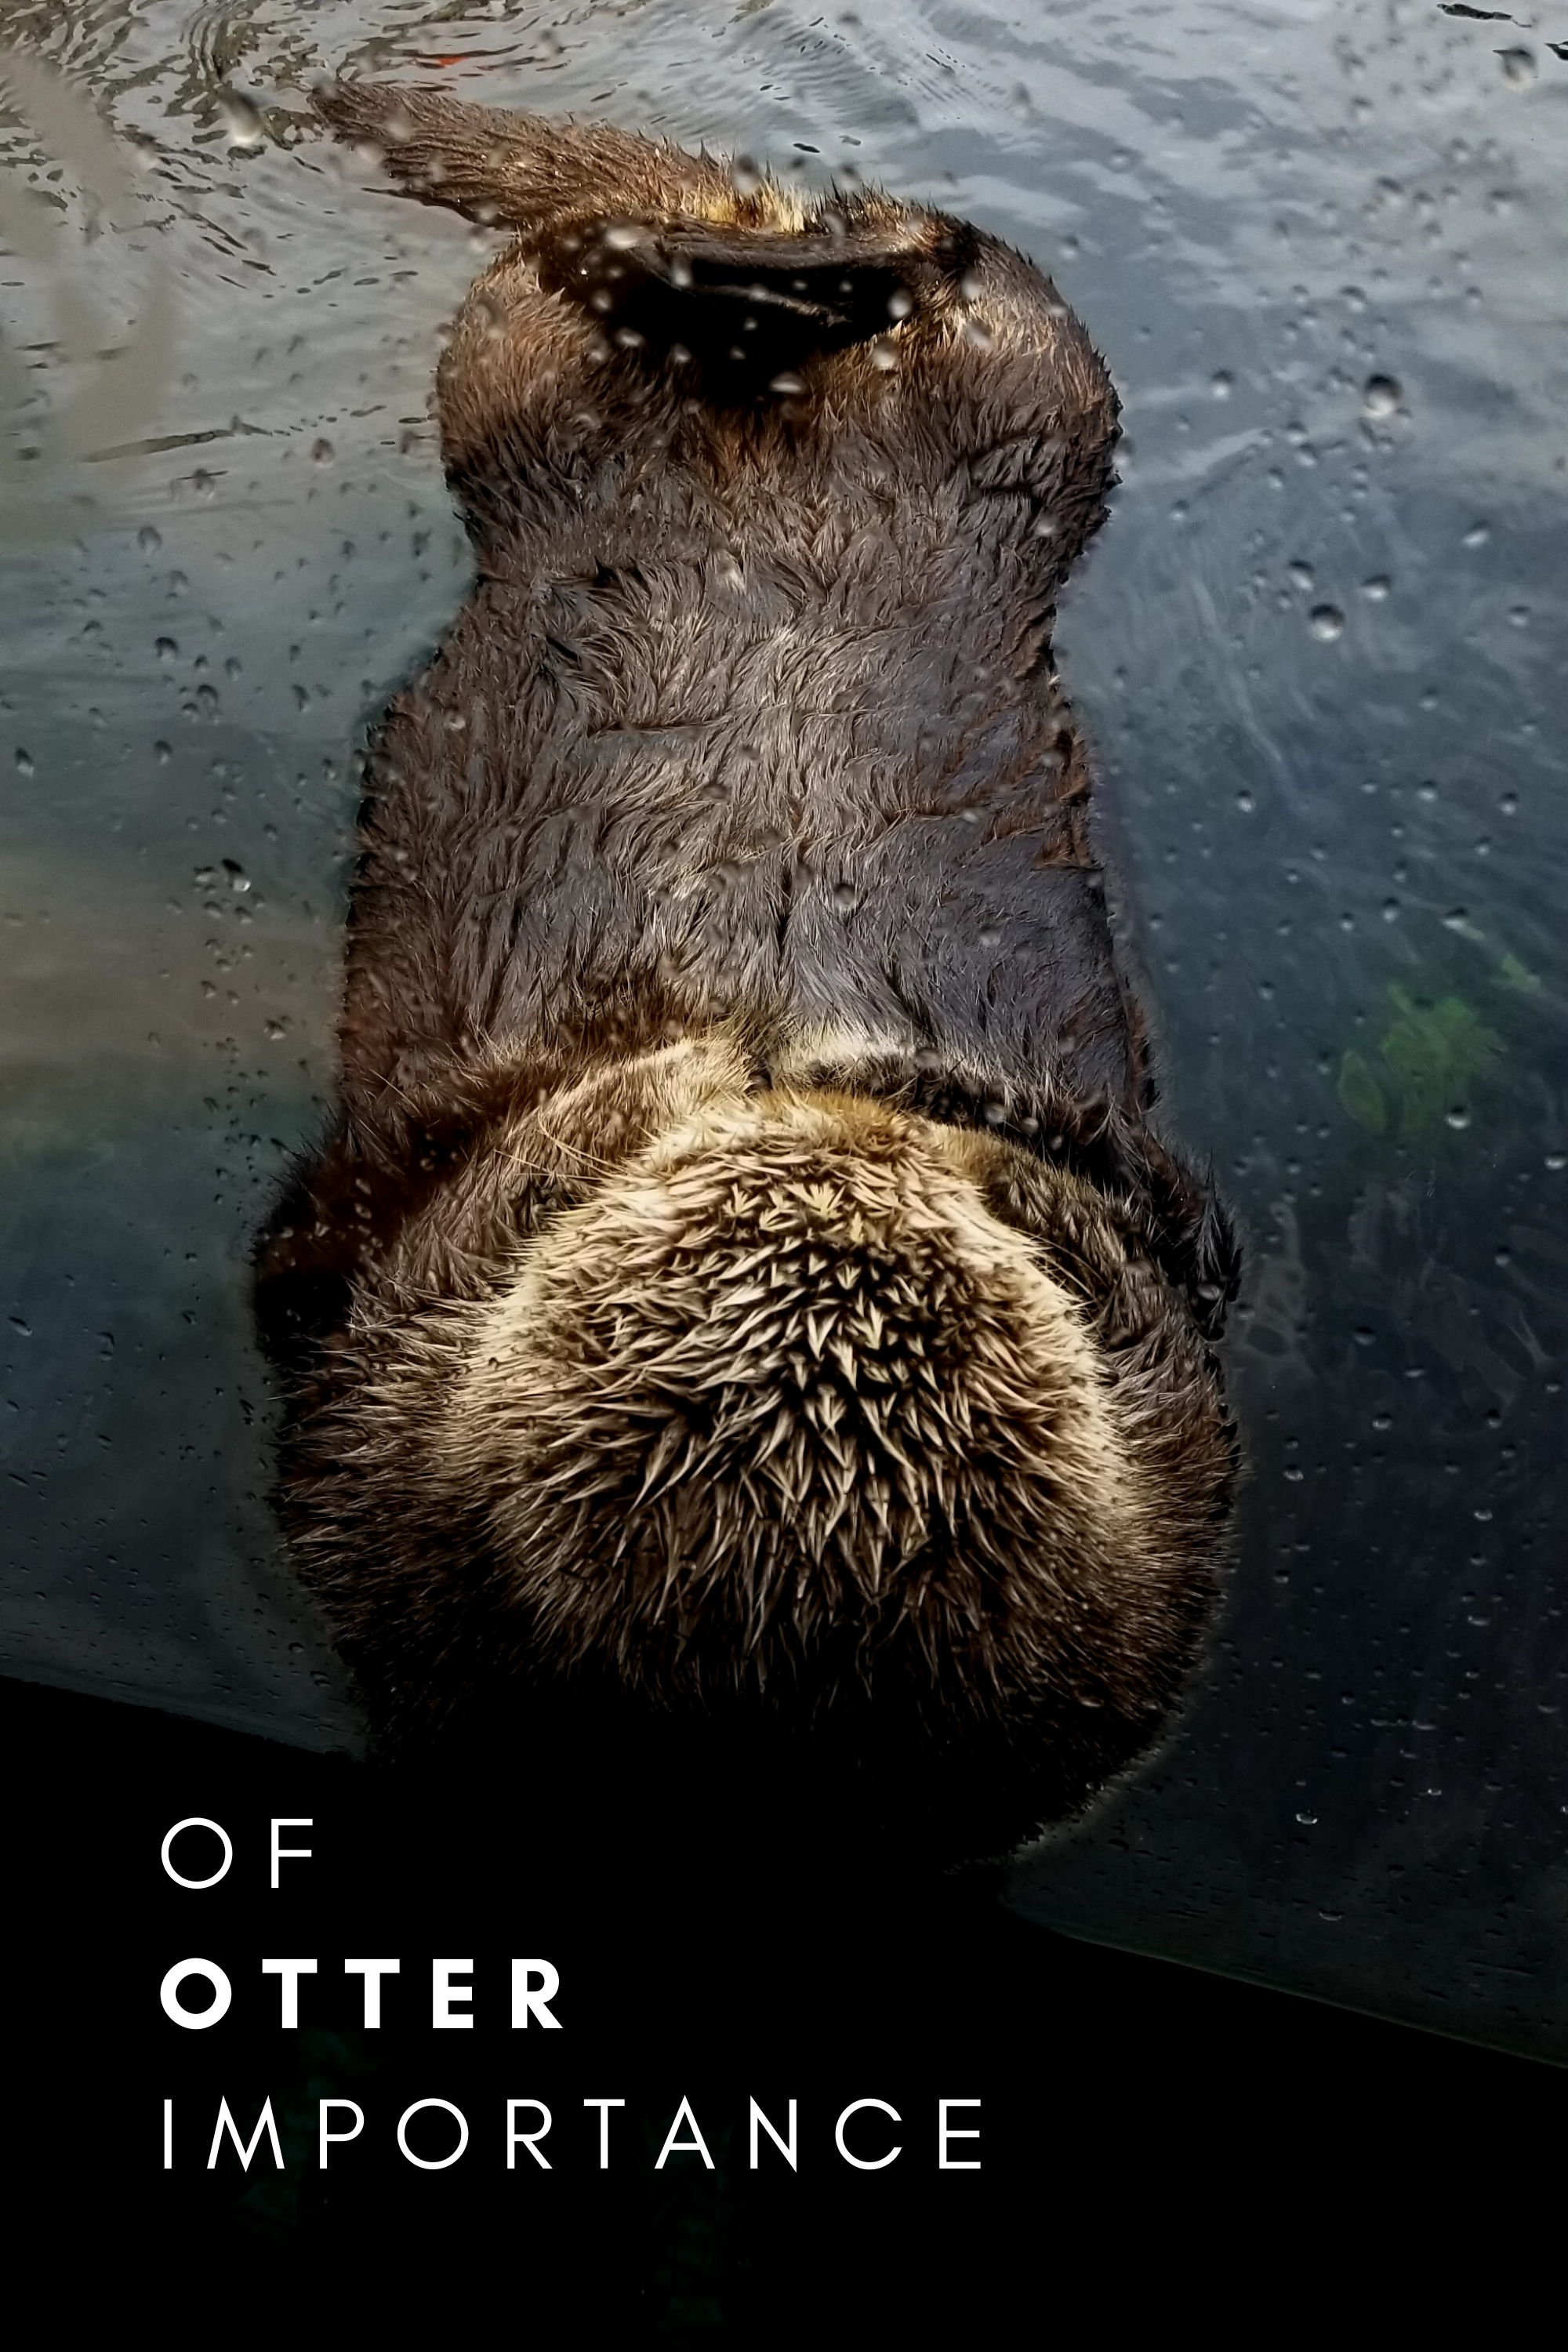 OF OTTER IMPORTANCE | Behind the Design